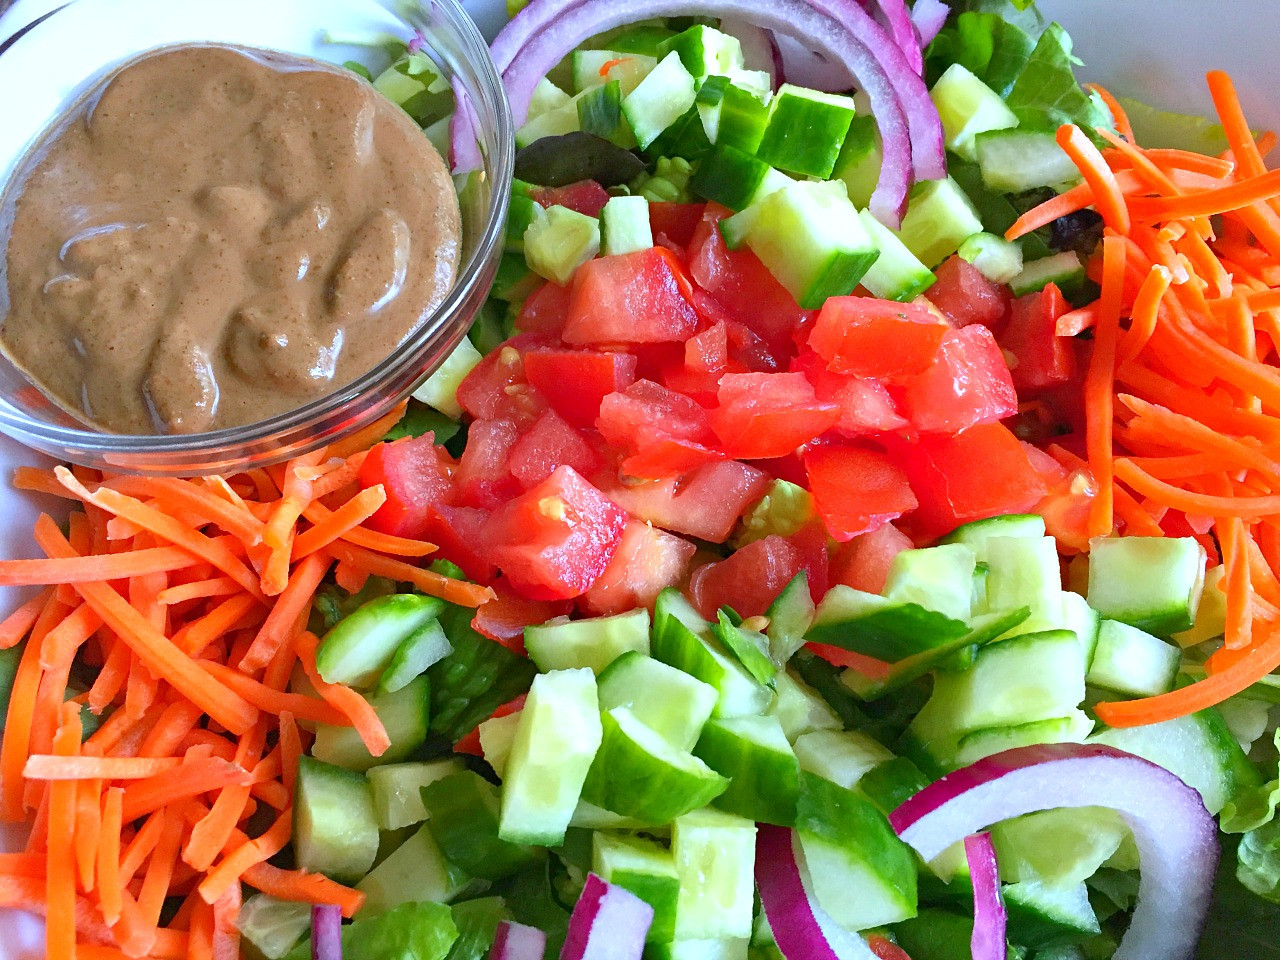 Heart Healthy Salad Dressings
 Delicious Heart Healthy Salad with a Creamy Balsamic